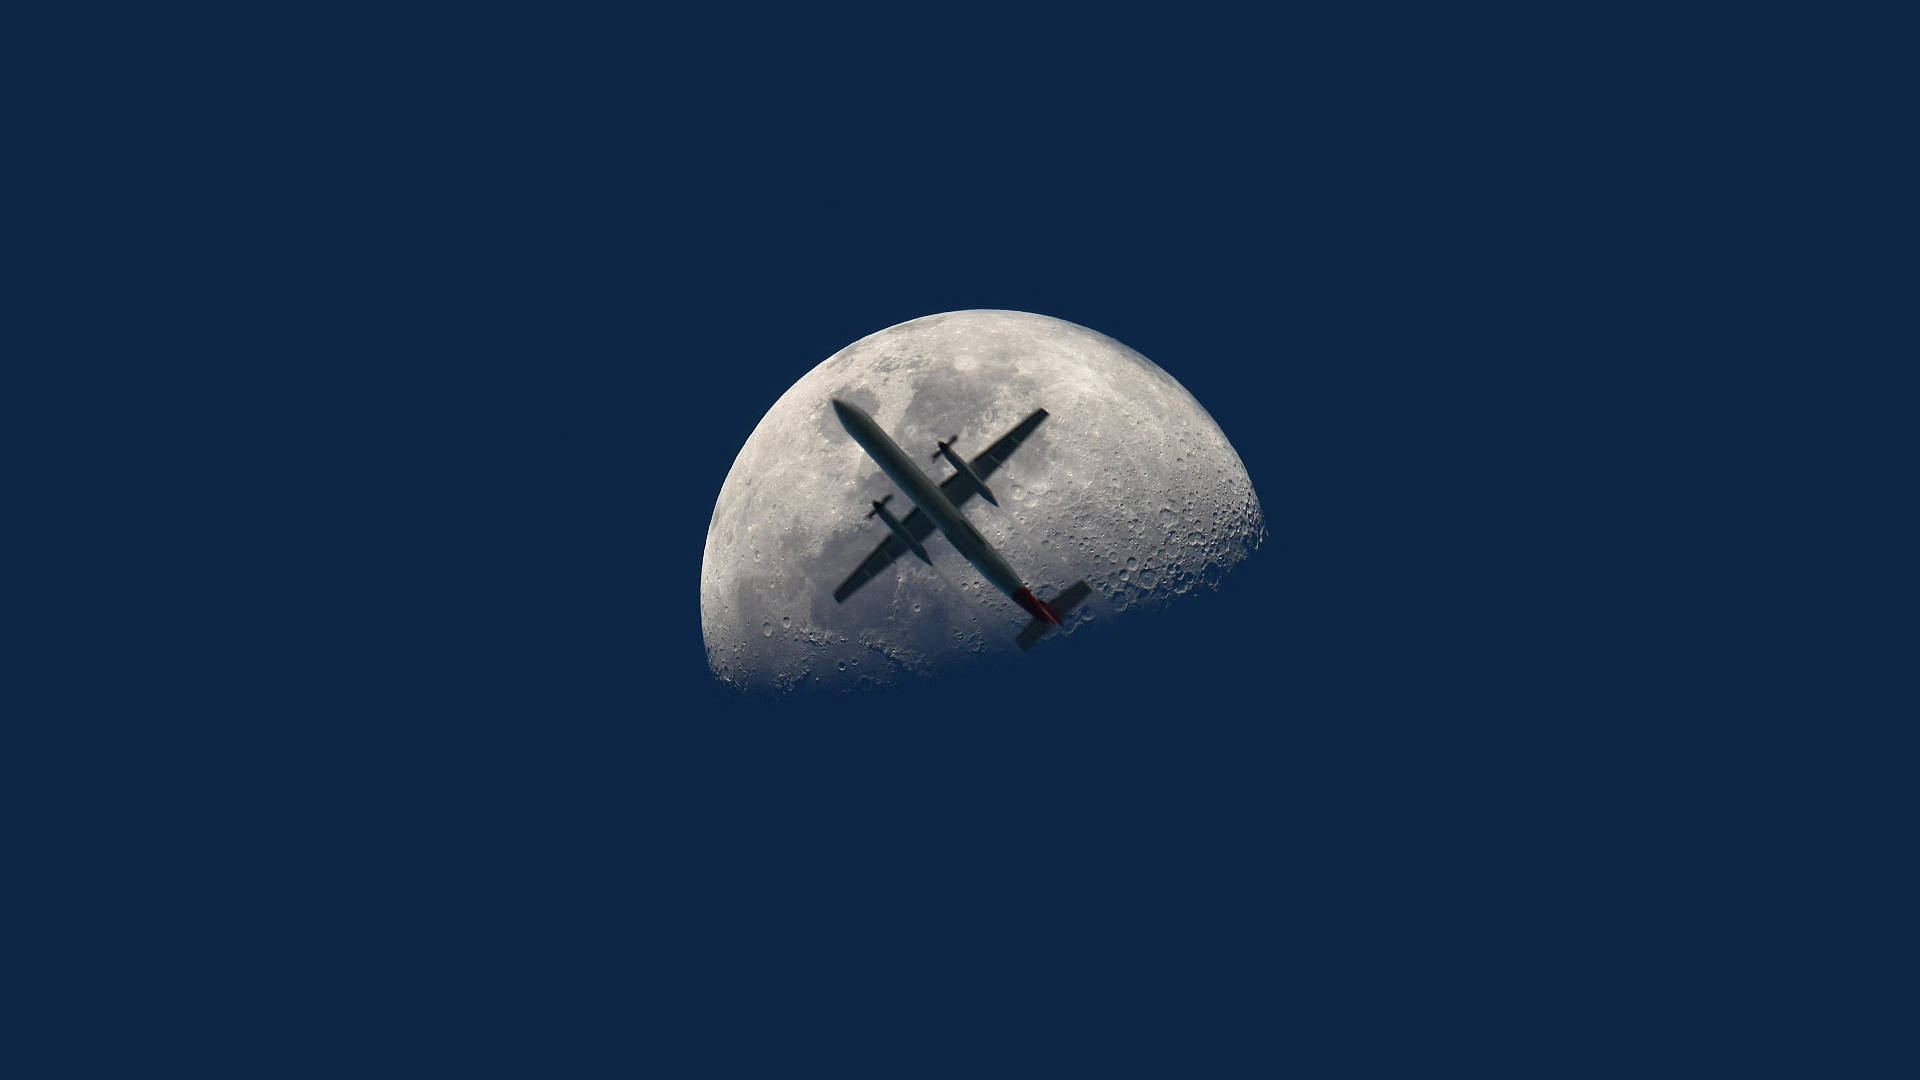 Hd Plane Over Moon Background